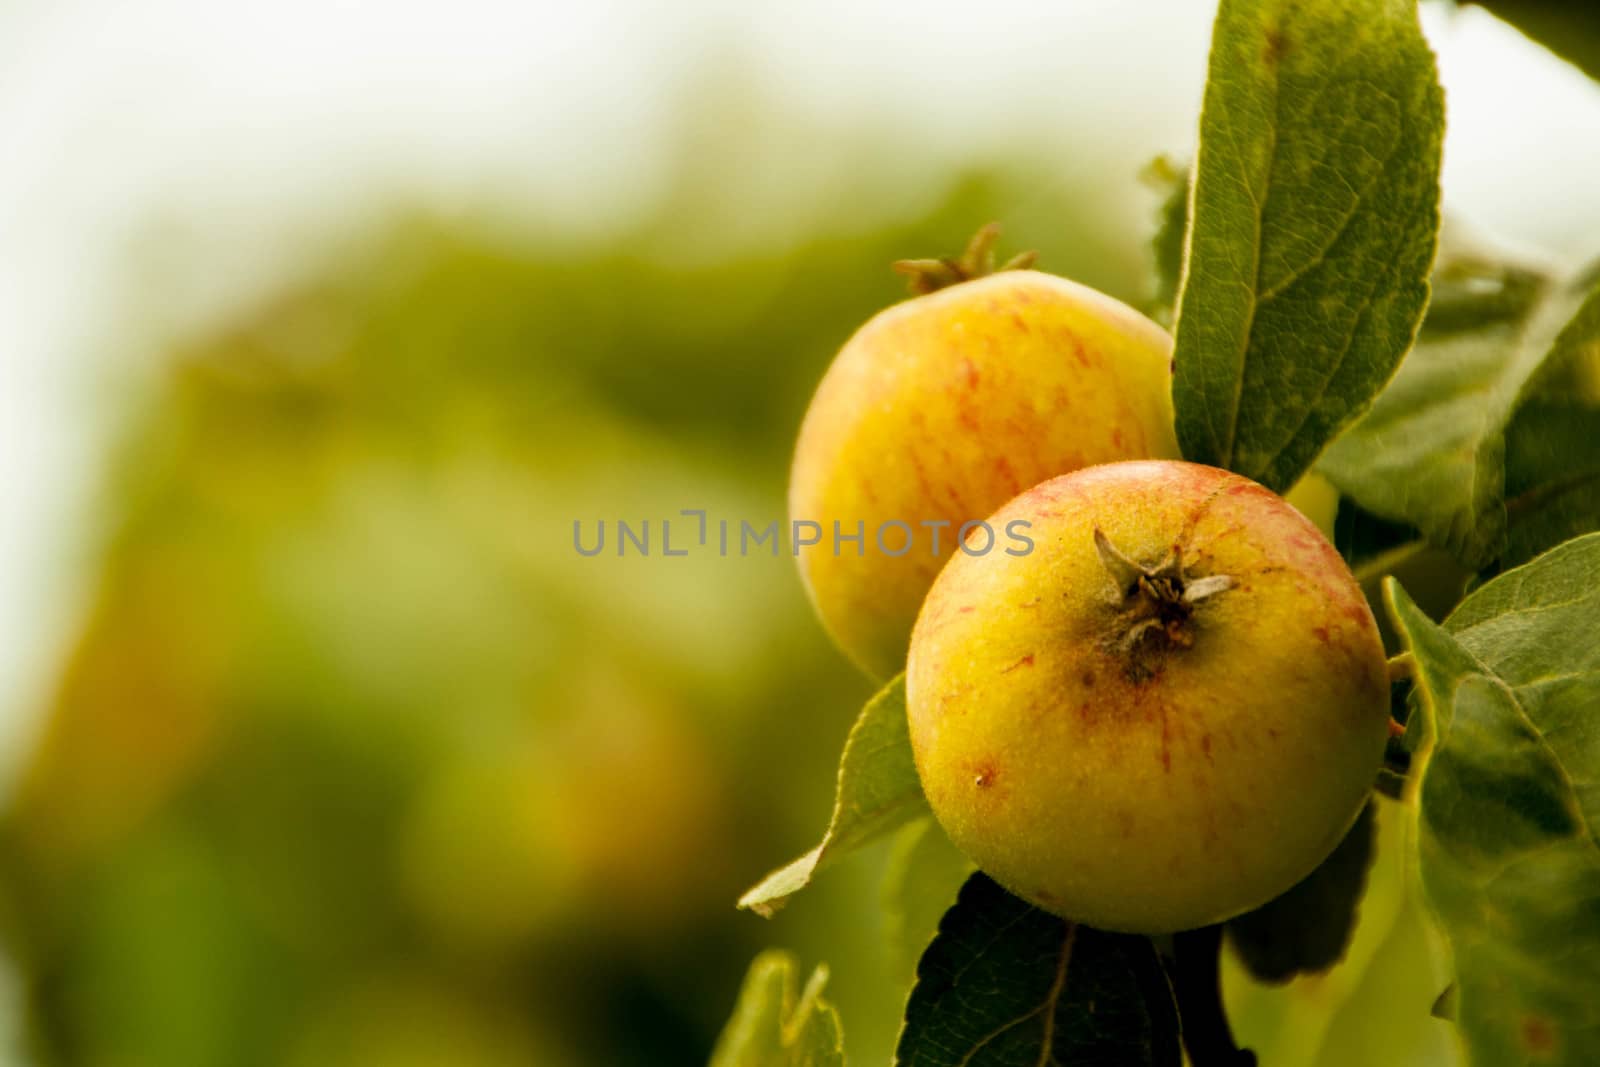 apples on a branch ready to be harvested, outdoors, selective focus